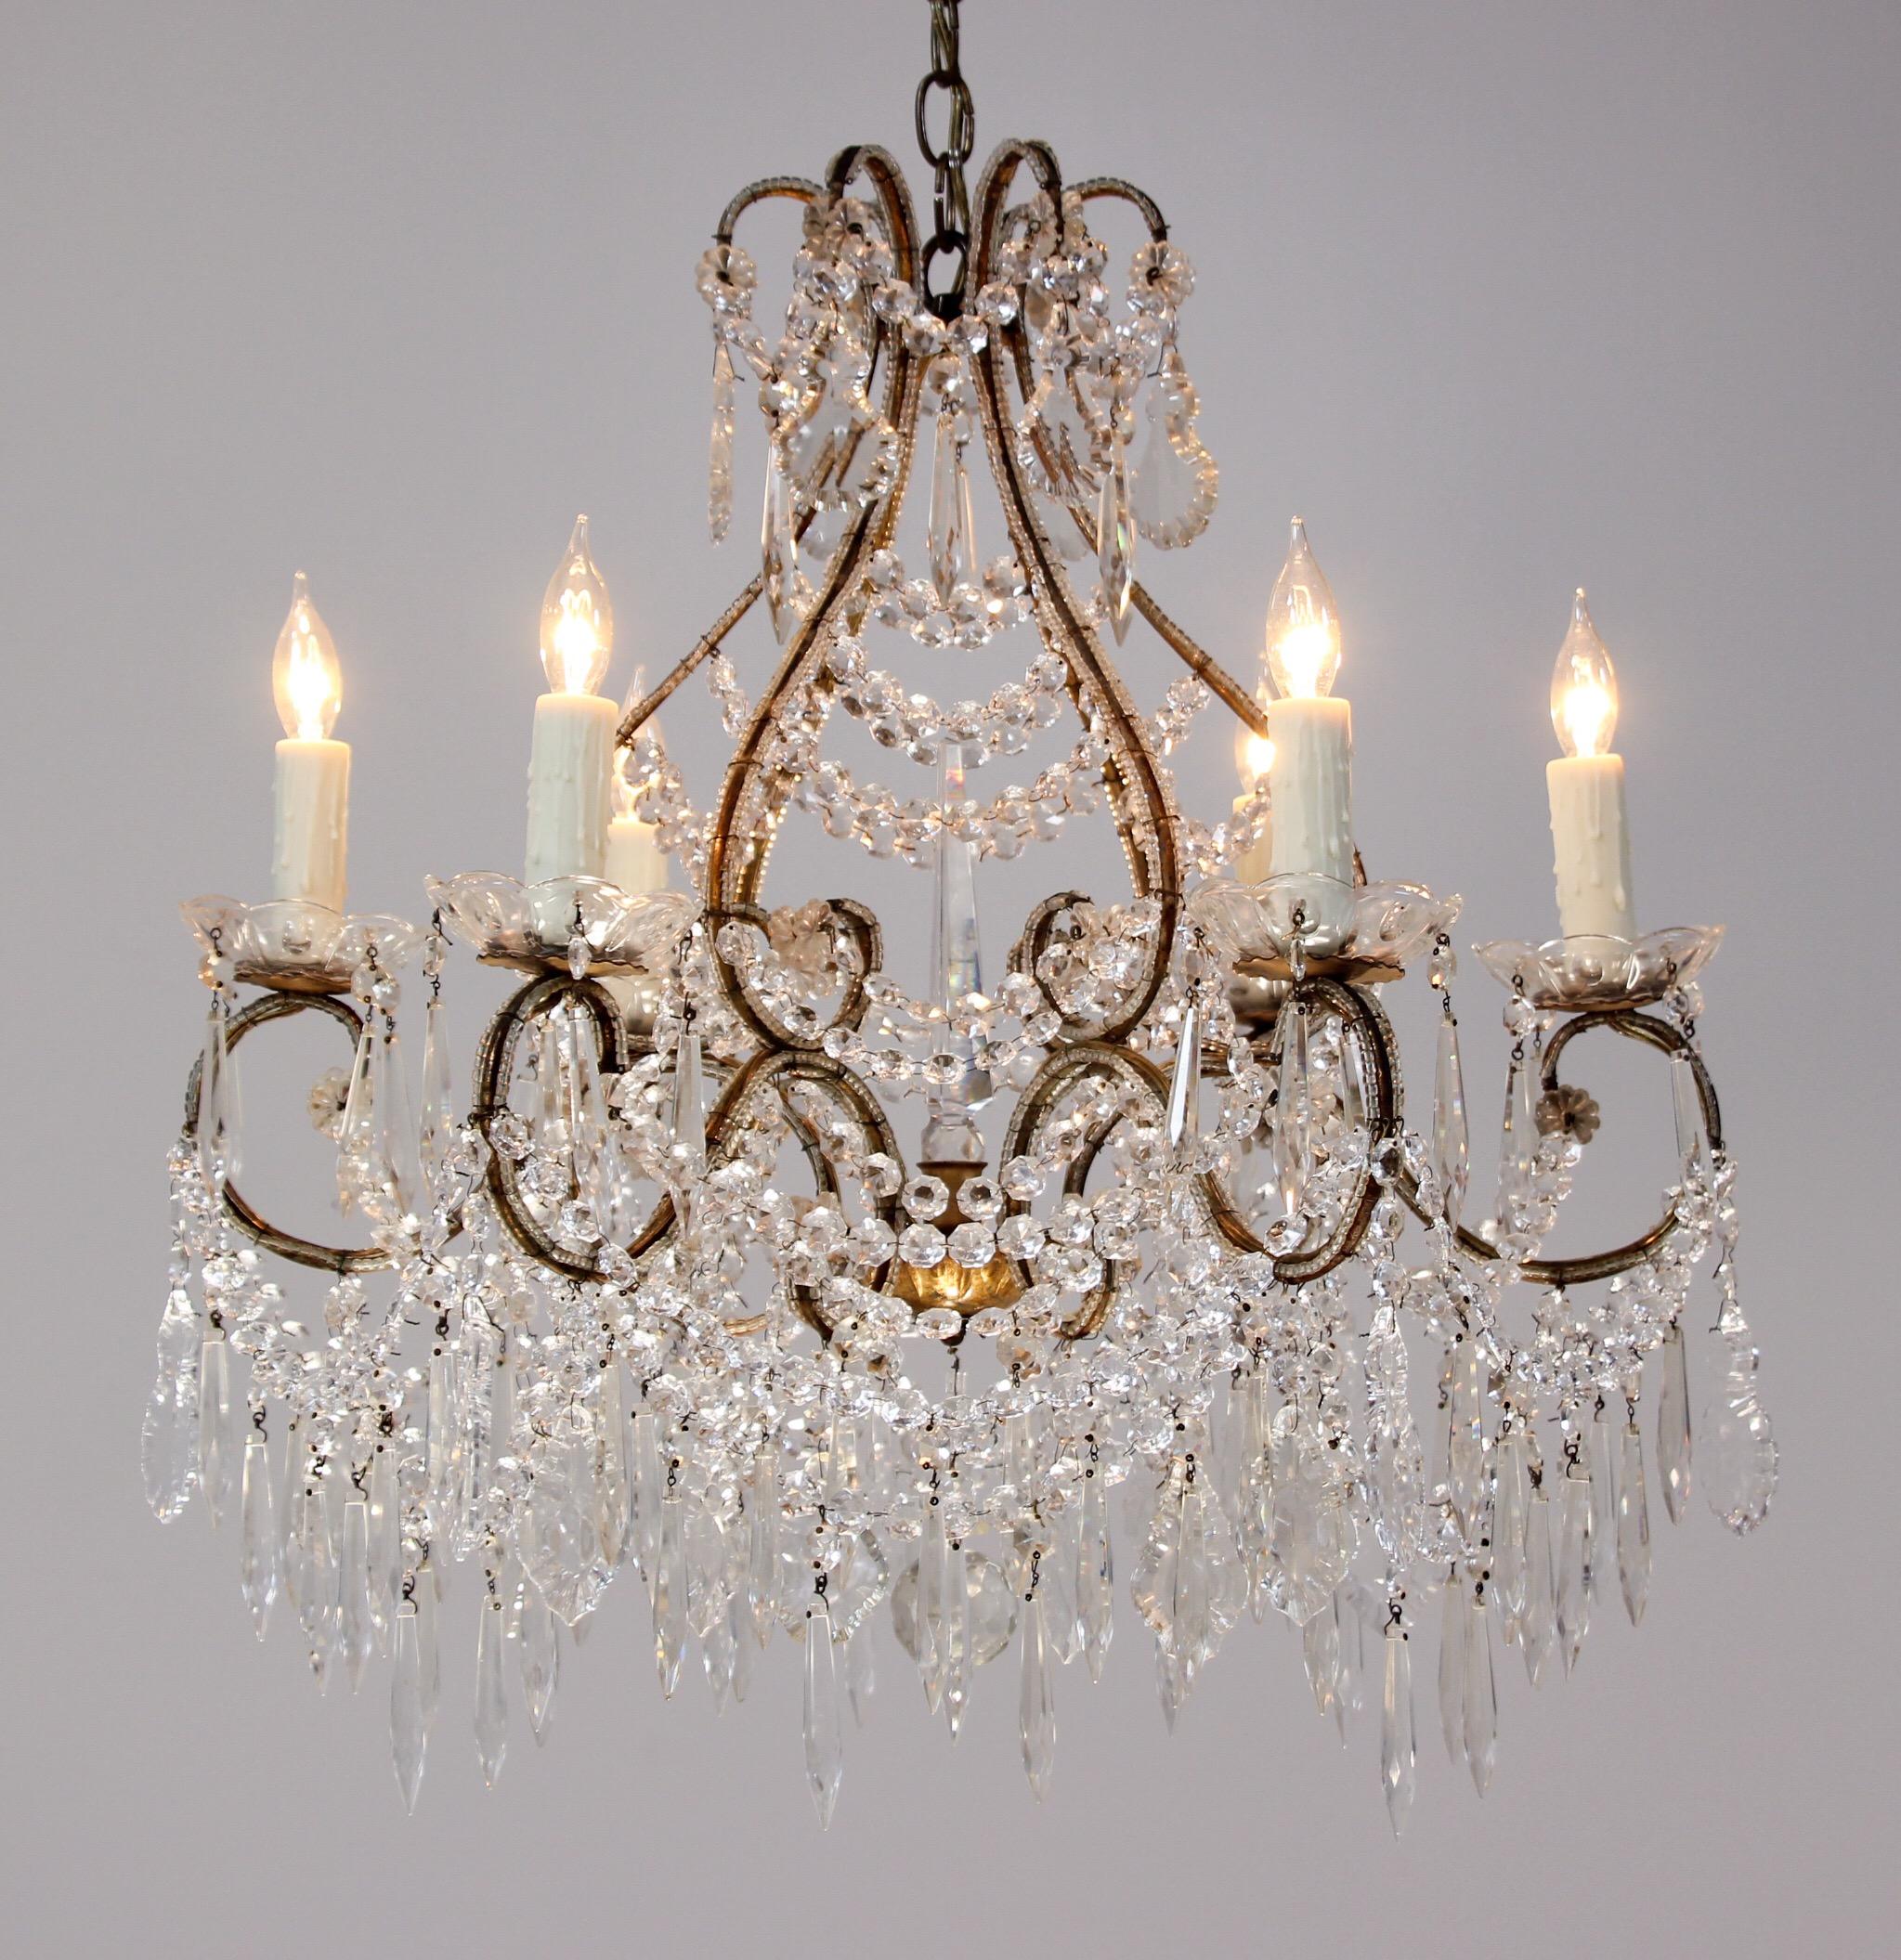 Glamorous, Italian 1940s crystal chandelier featuring a graceful gilt-iron beaded frame festooned with a bounty of polished crystal beads and prisms. The gilt finish has acquired a pleasing warm patina over the decades.  
     
Perfect for a space